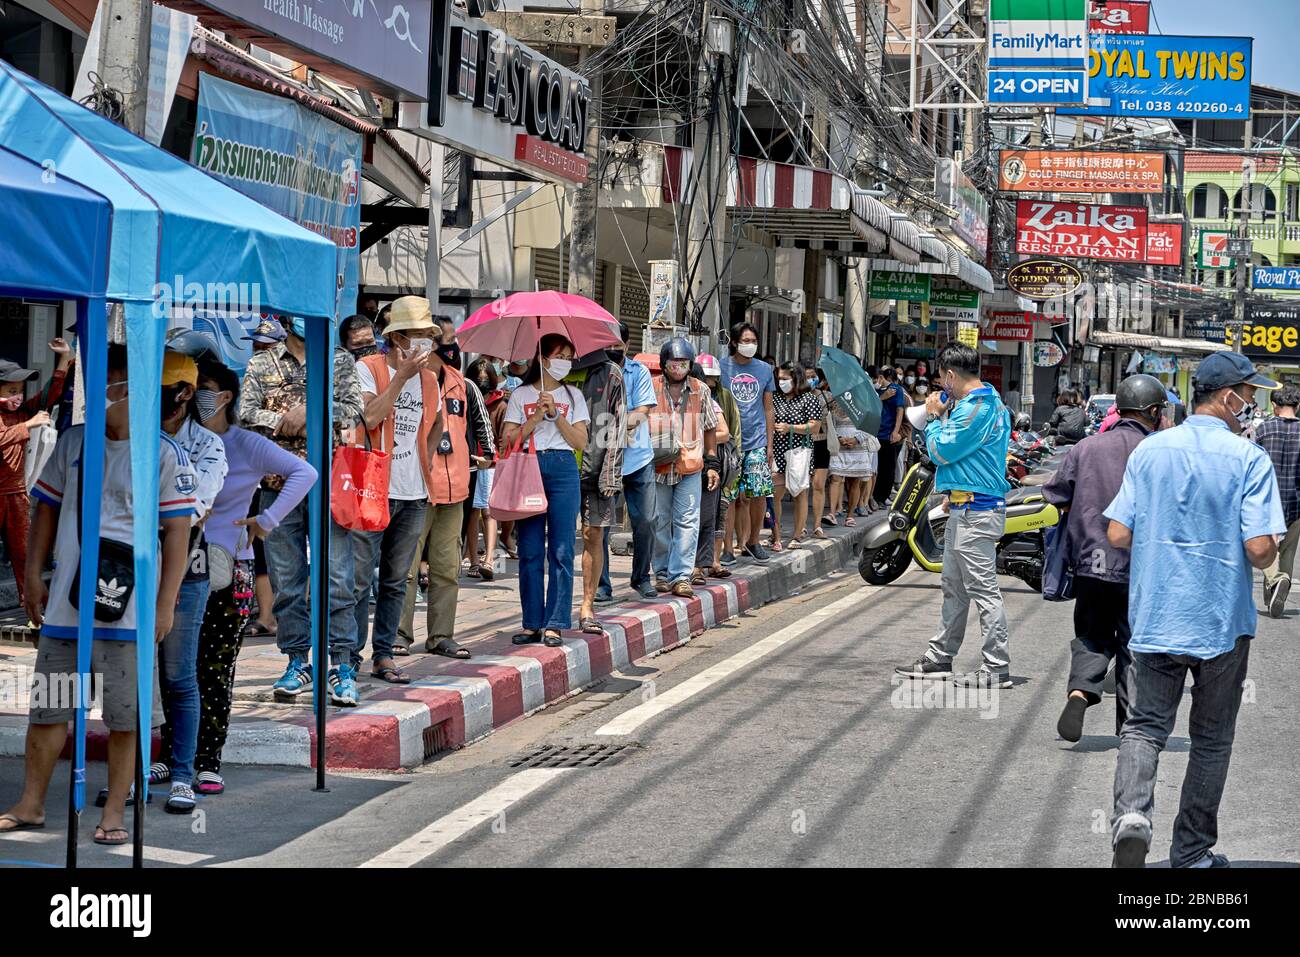 Covid-19 and coronavirus effect on income. People queueing for free food handouts donated by the local businesses in Pattaya Thailand Southeast Asia Stock Photo